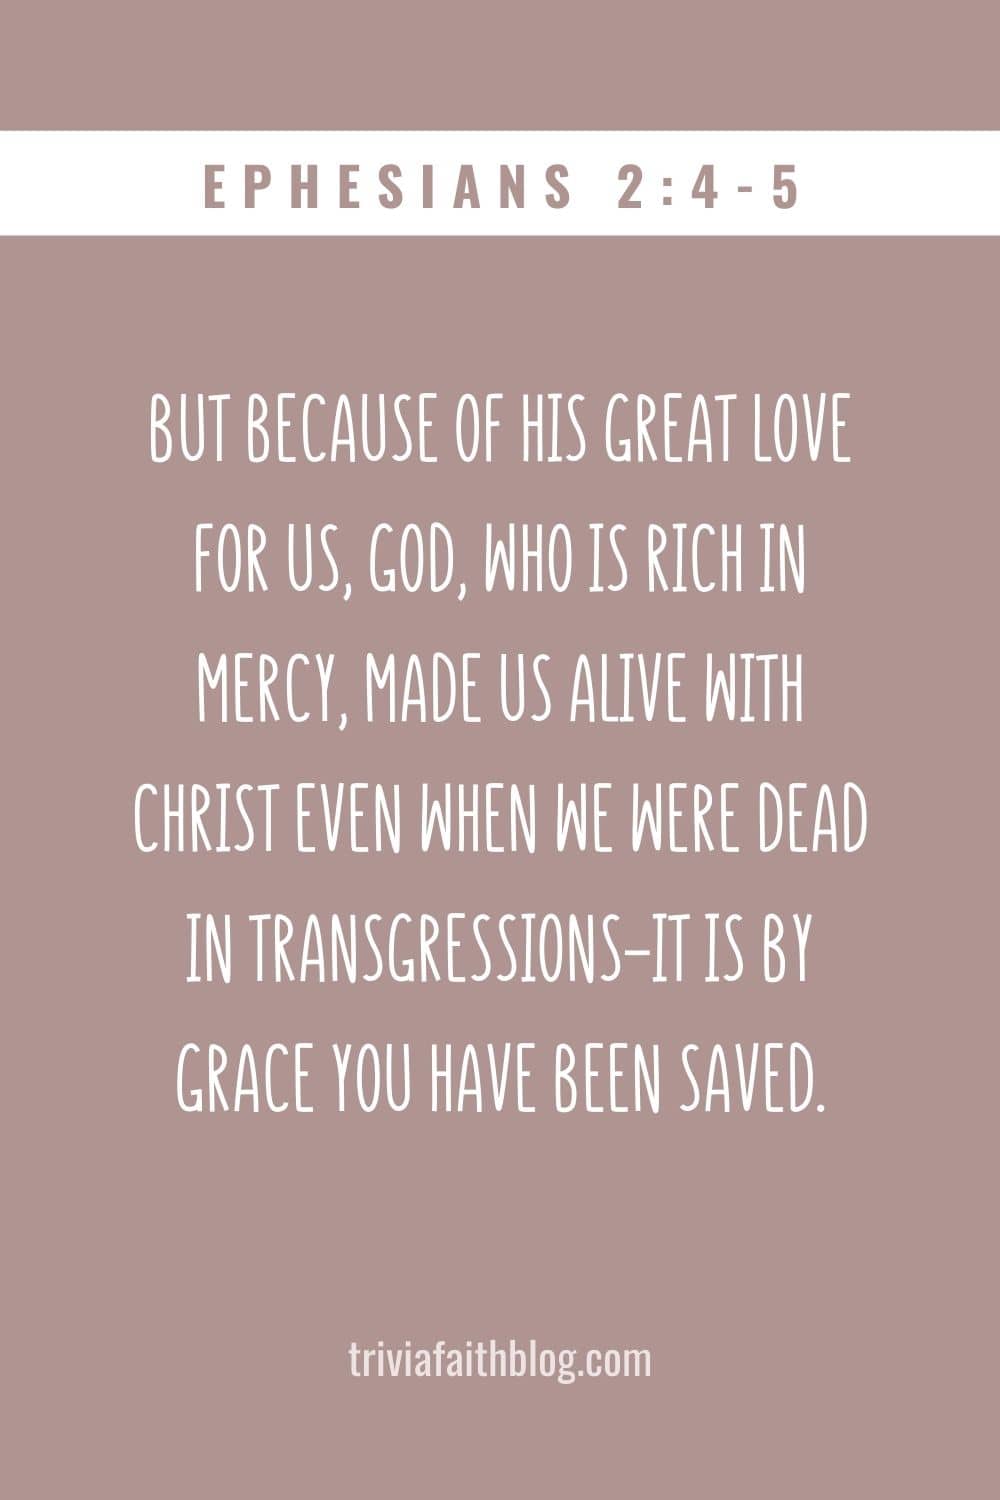 it is by grace you have been saved